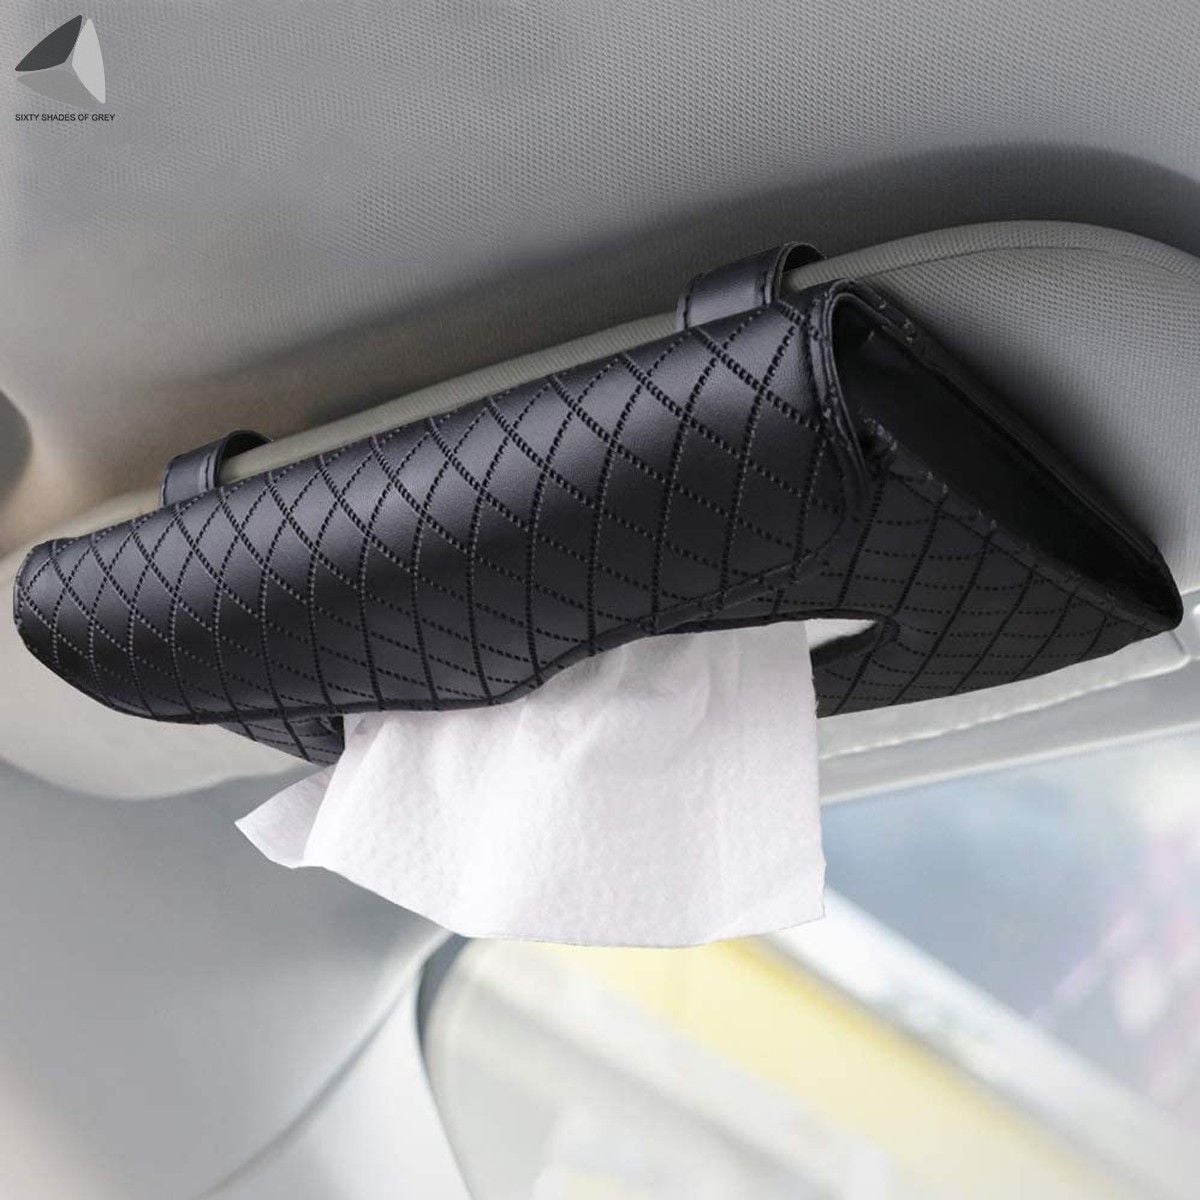 Diamond Studded Sun Visor Tissue Holder With Sun Visor For Girls White,  Black, Red, Pink Ideal For Seat Back And Car Accessories From  Dhgatetop_company, $8.44